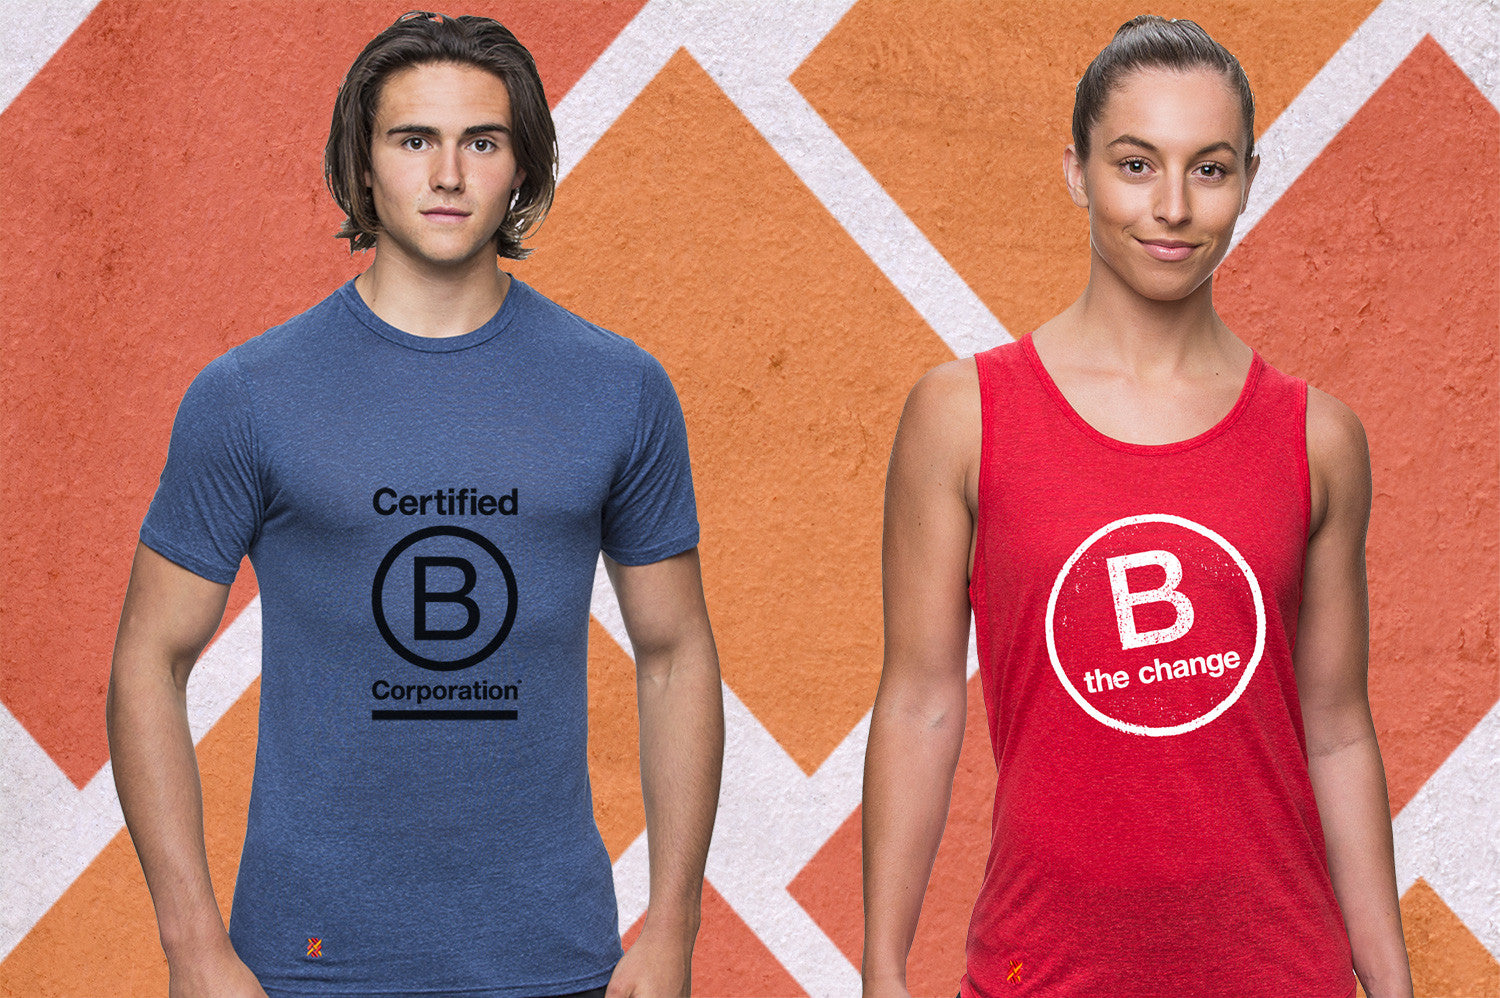 Two athletes, Male wearing a blue t-shirt with B Corporation logo on it and Female wearing a red singlet with a B Corporation logo.